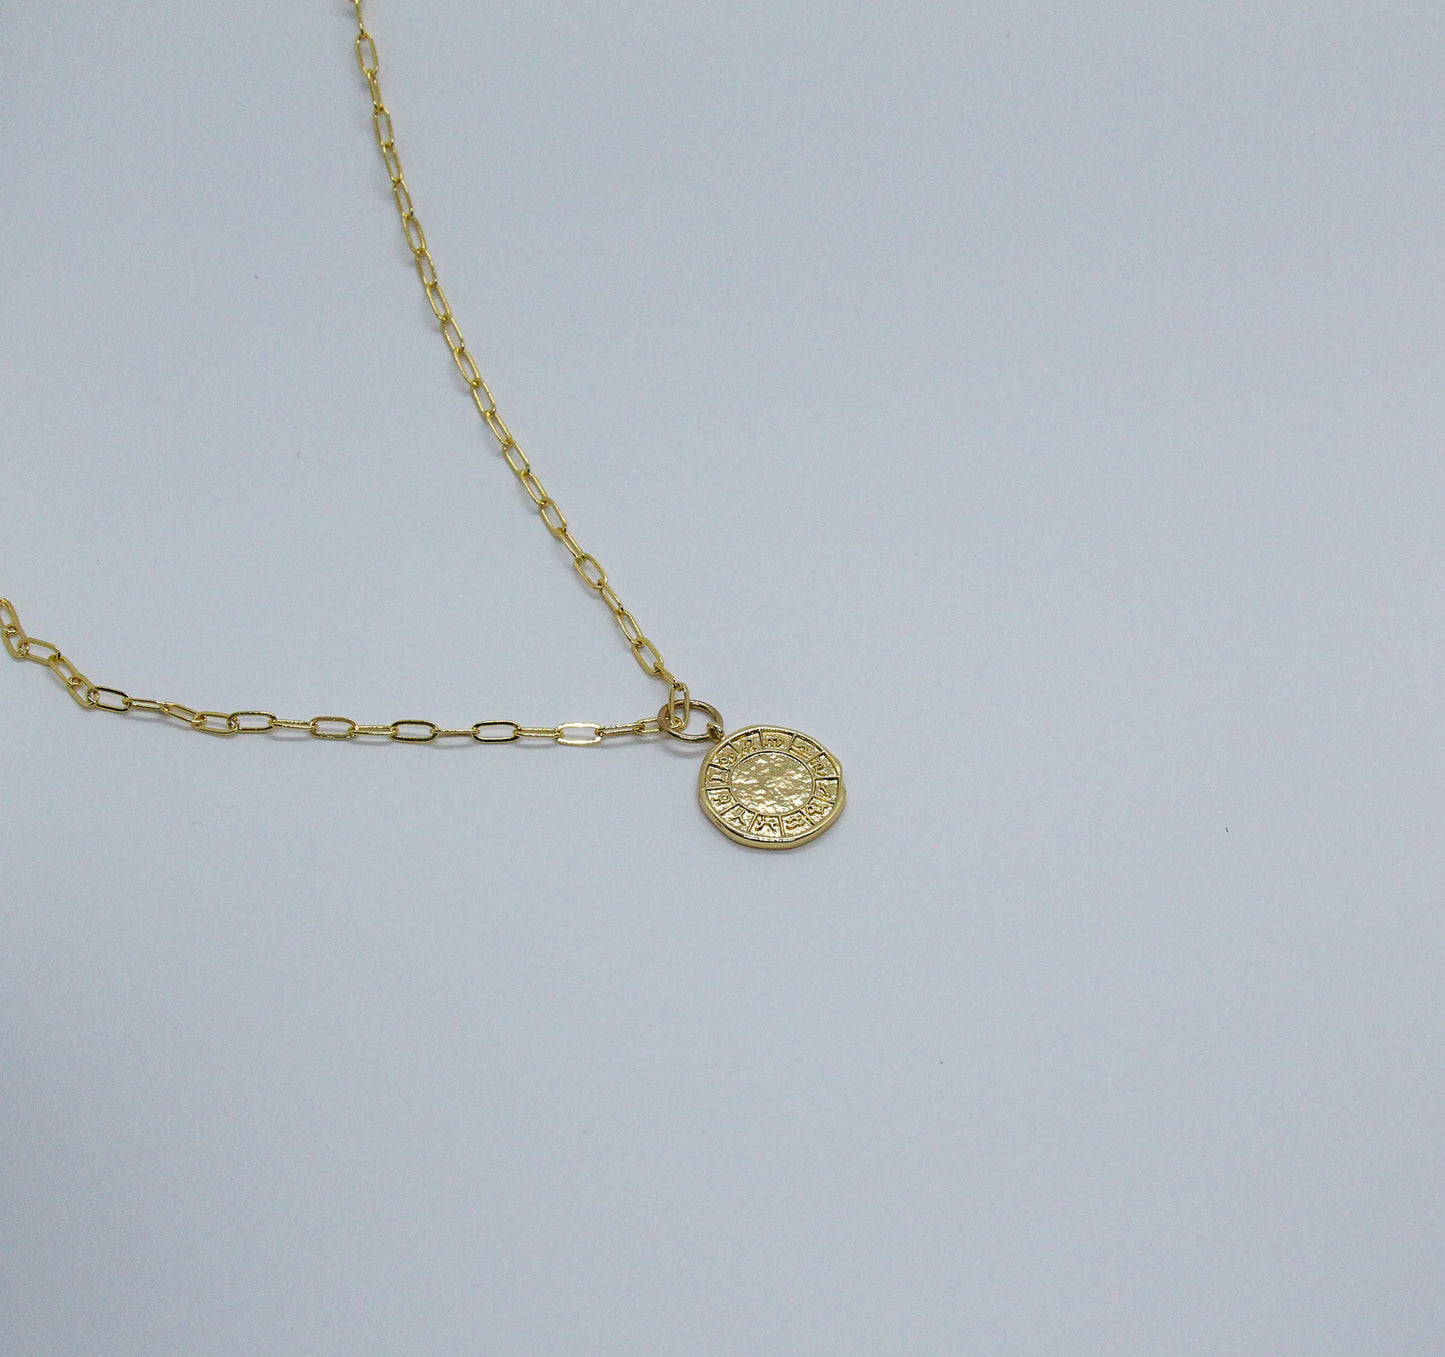 PaperClip Horoscope Medallion Necklace